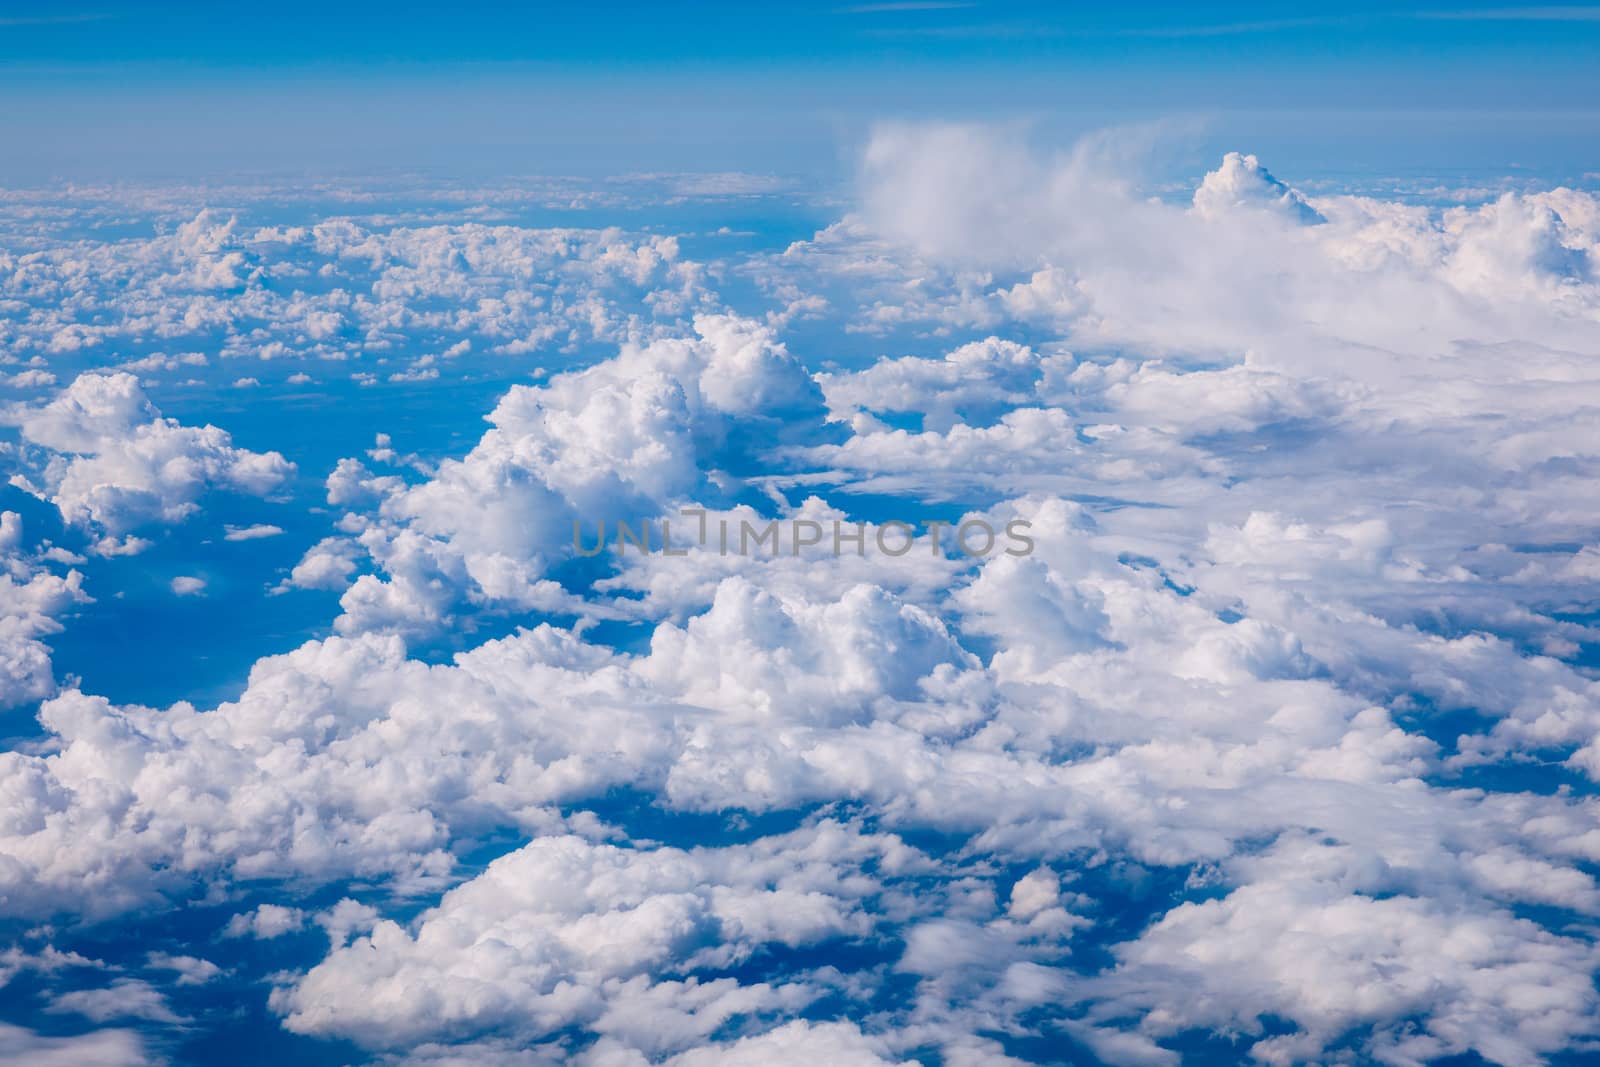 Amazing clouds and the sky as seen through the window of an aircraft. Clouds, sun, sky as seen through window of an aircraft. Bright blue sky with clouds and sunlight seen through an airplane window.